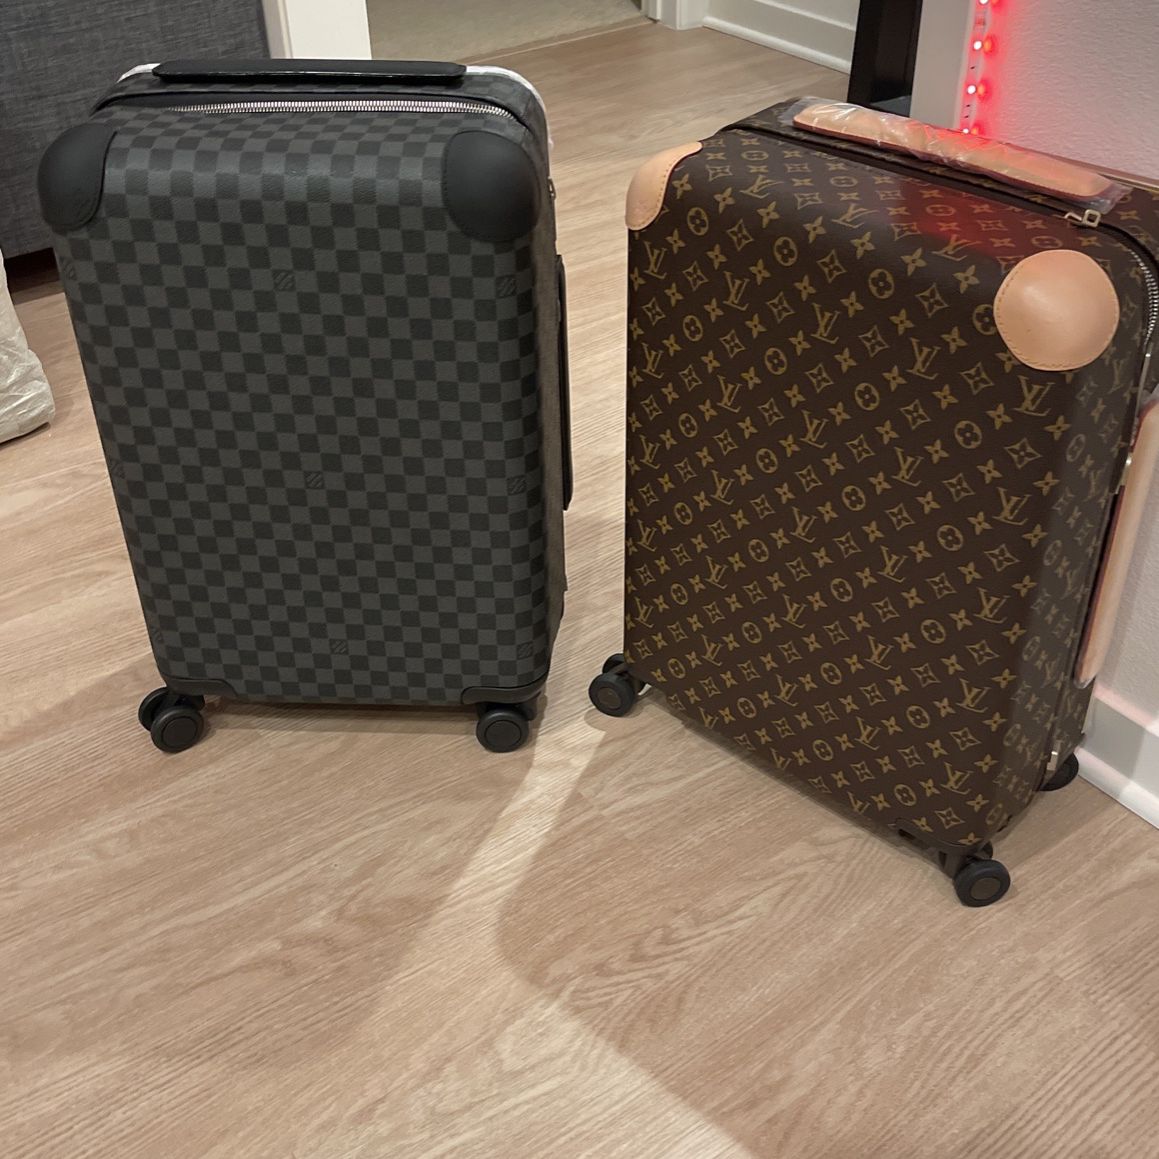 Louis Vuitton Trunks & Bags for Sale in Ontario, CA - OfferUp